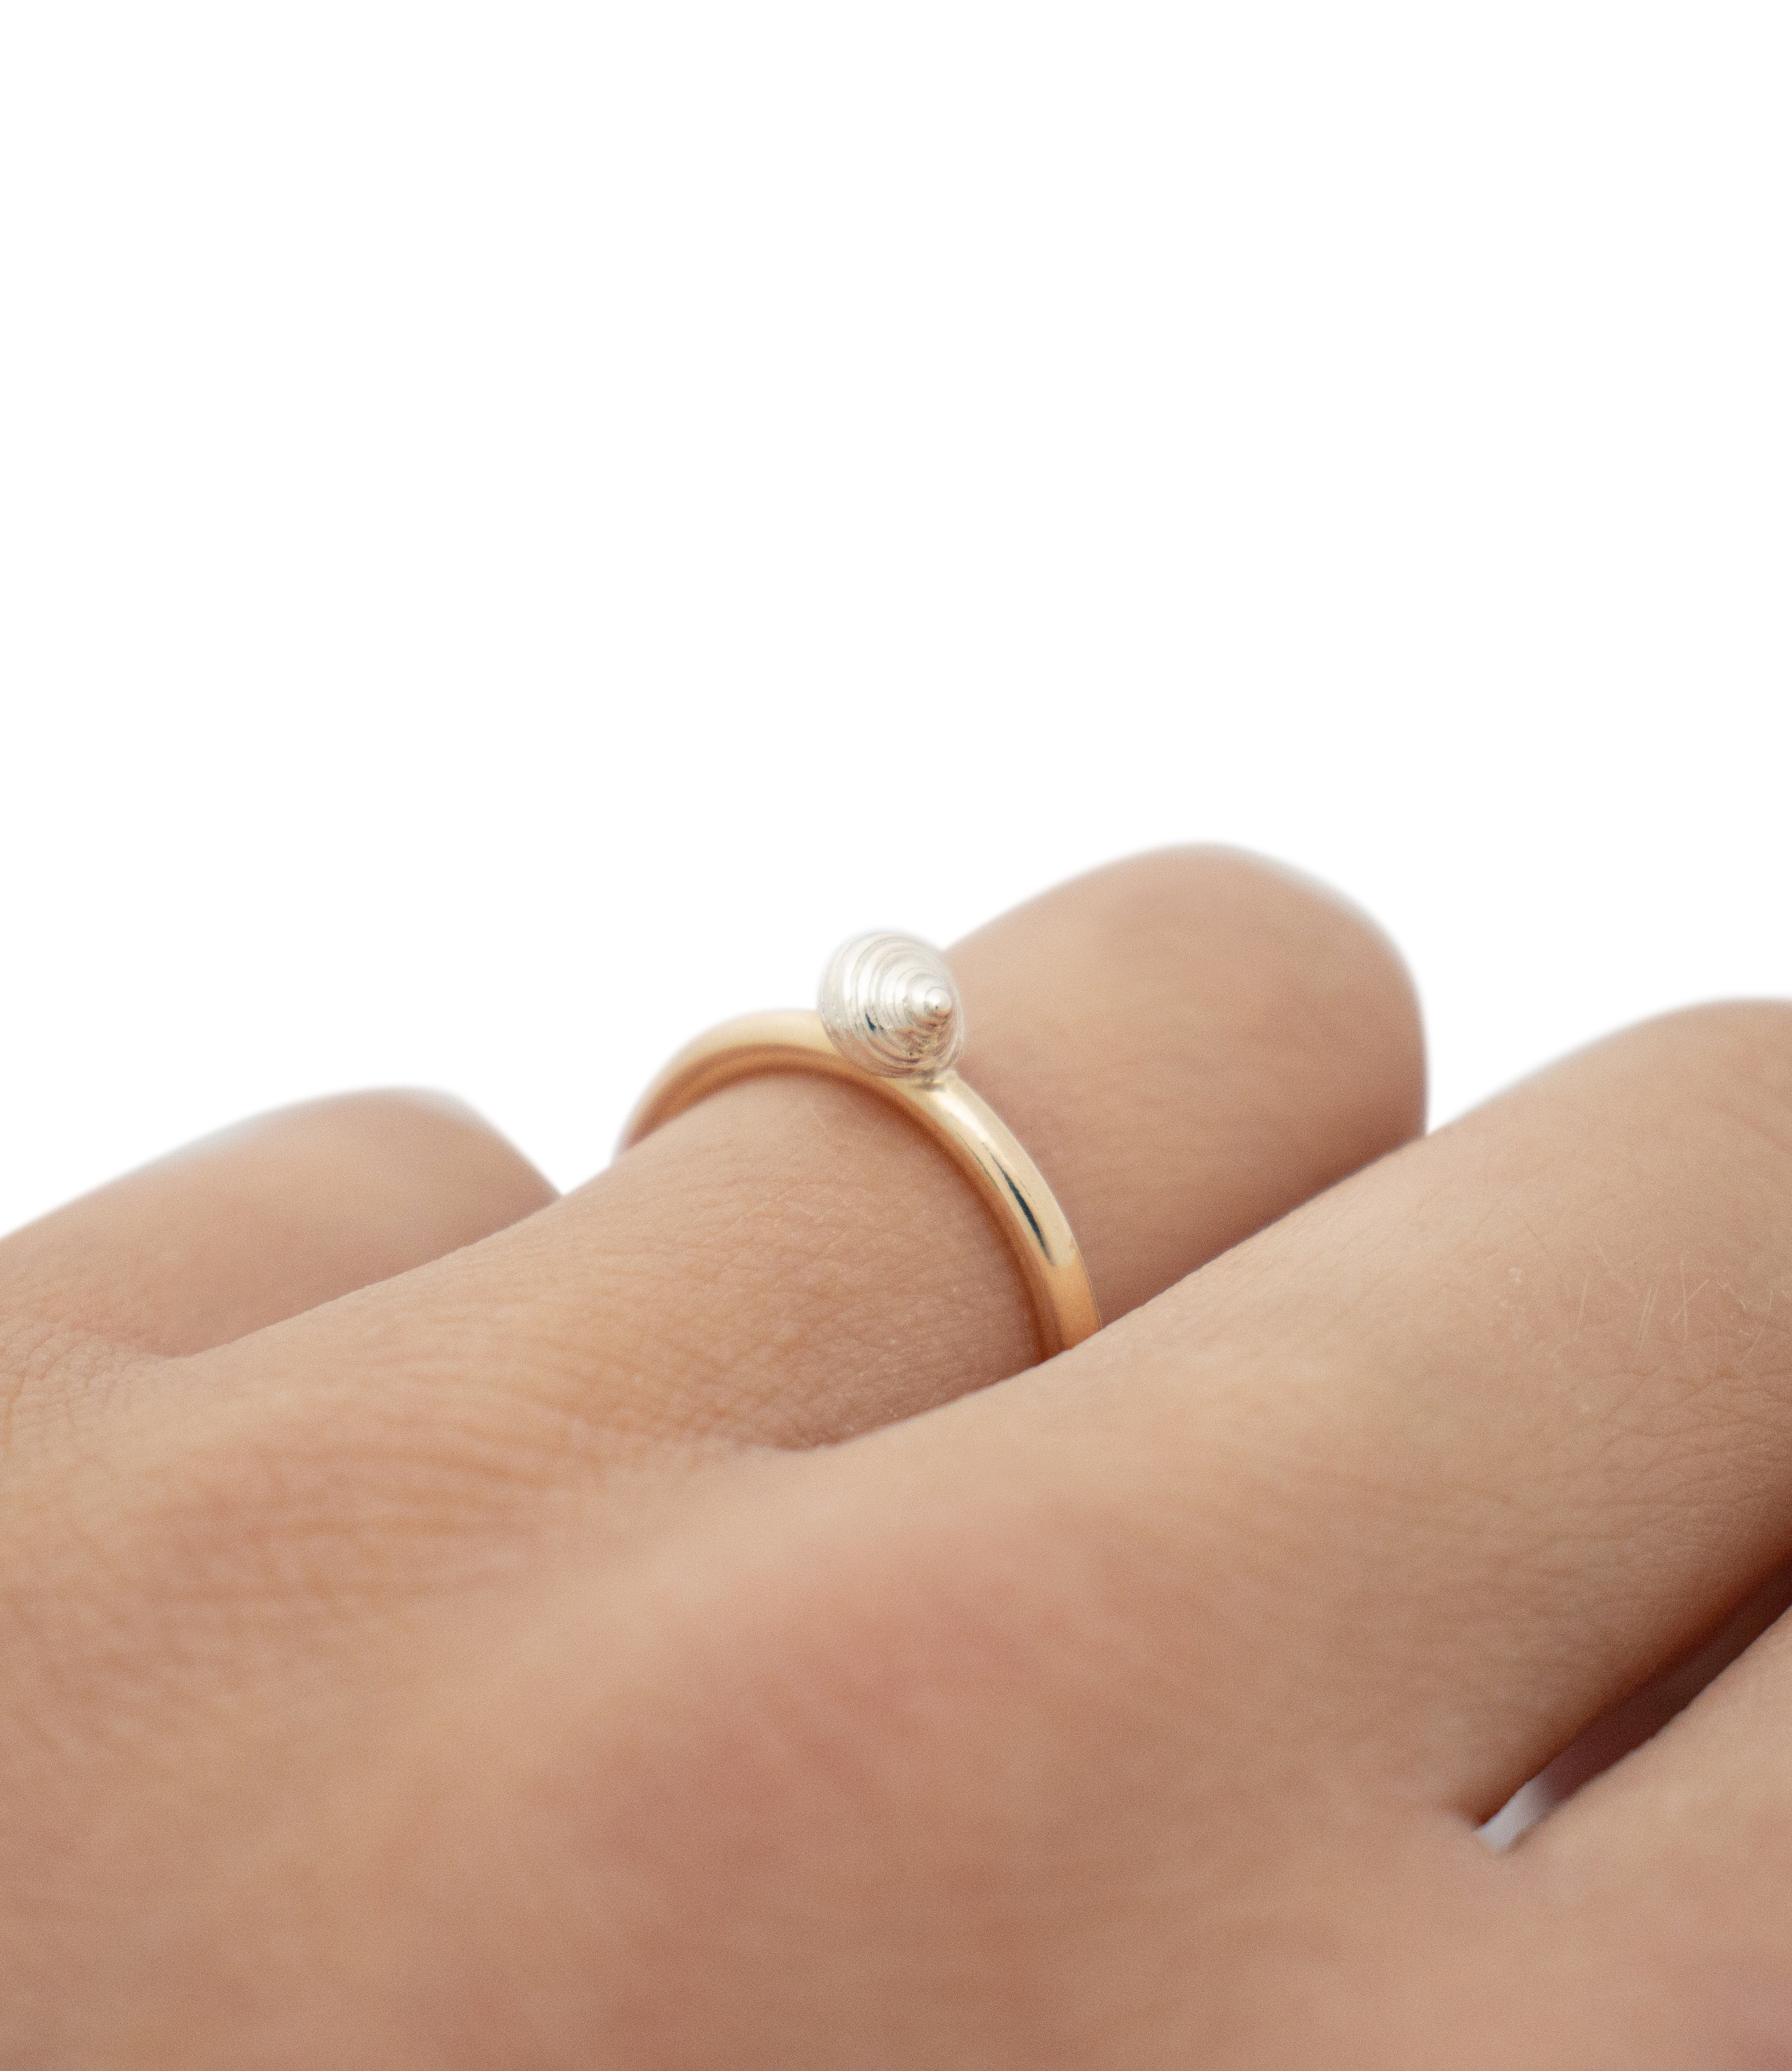 Port Isaac ring. Port Isaac shell. Port Isaac jewellery. Port Isaac Cornwall. Cornwall jewellery. Cornwall shell jewellery. Silver shell jewellery. Gold shell jewellery. Those Happy Places. Serena Ansell Jewellery.